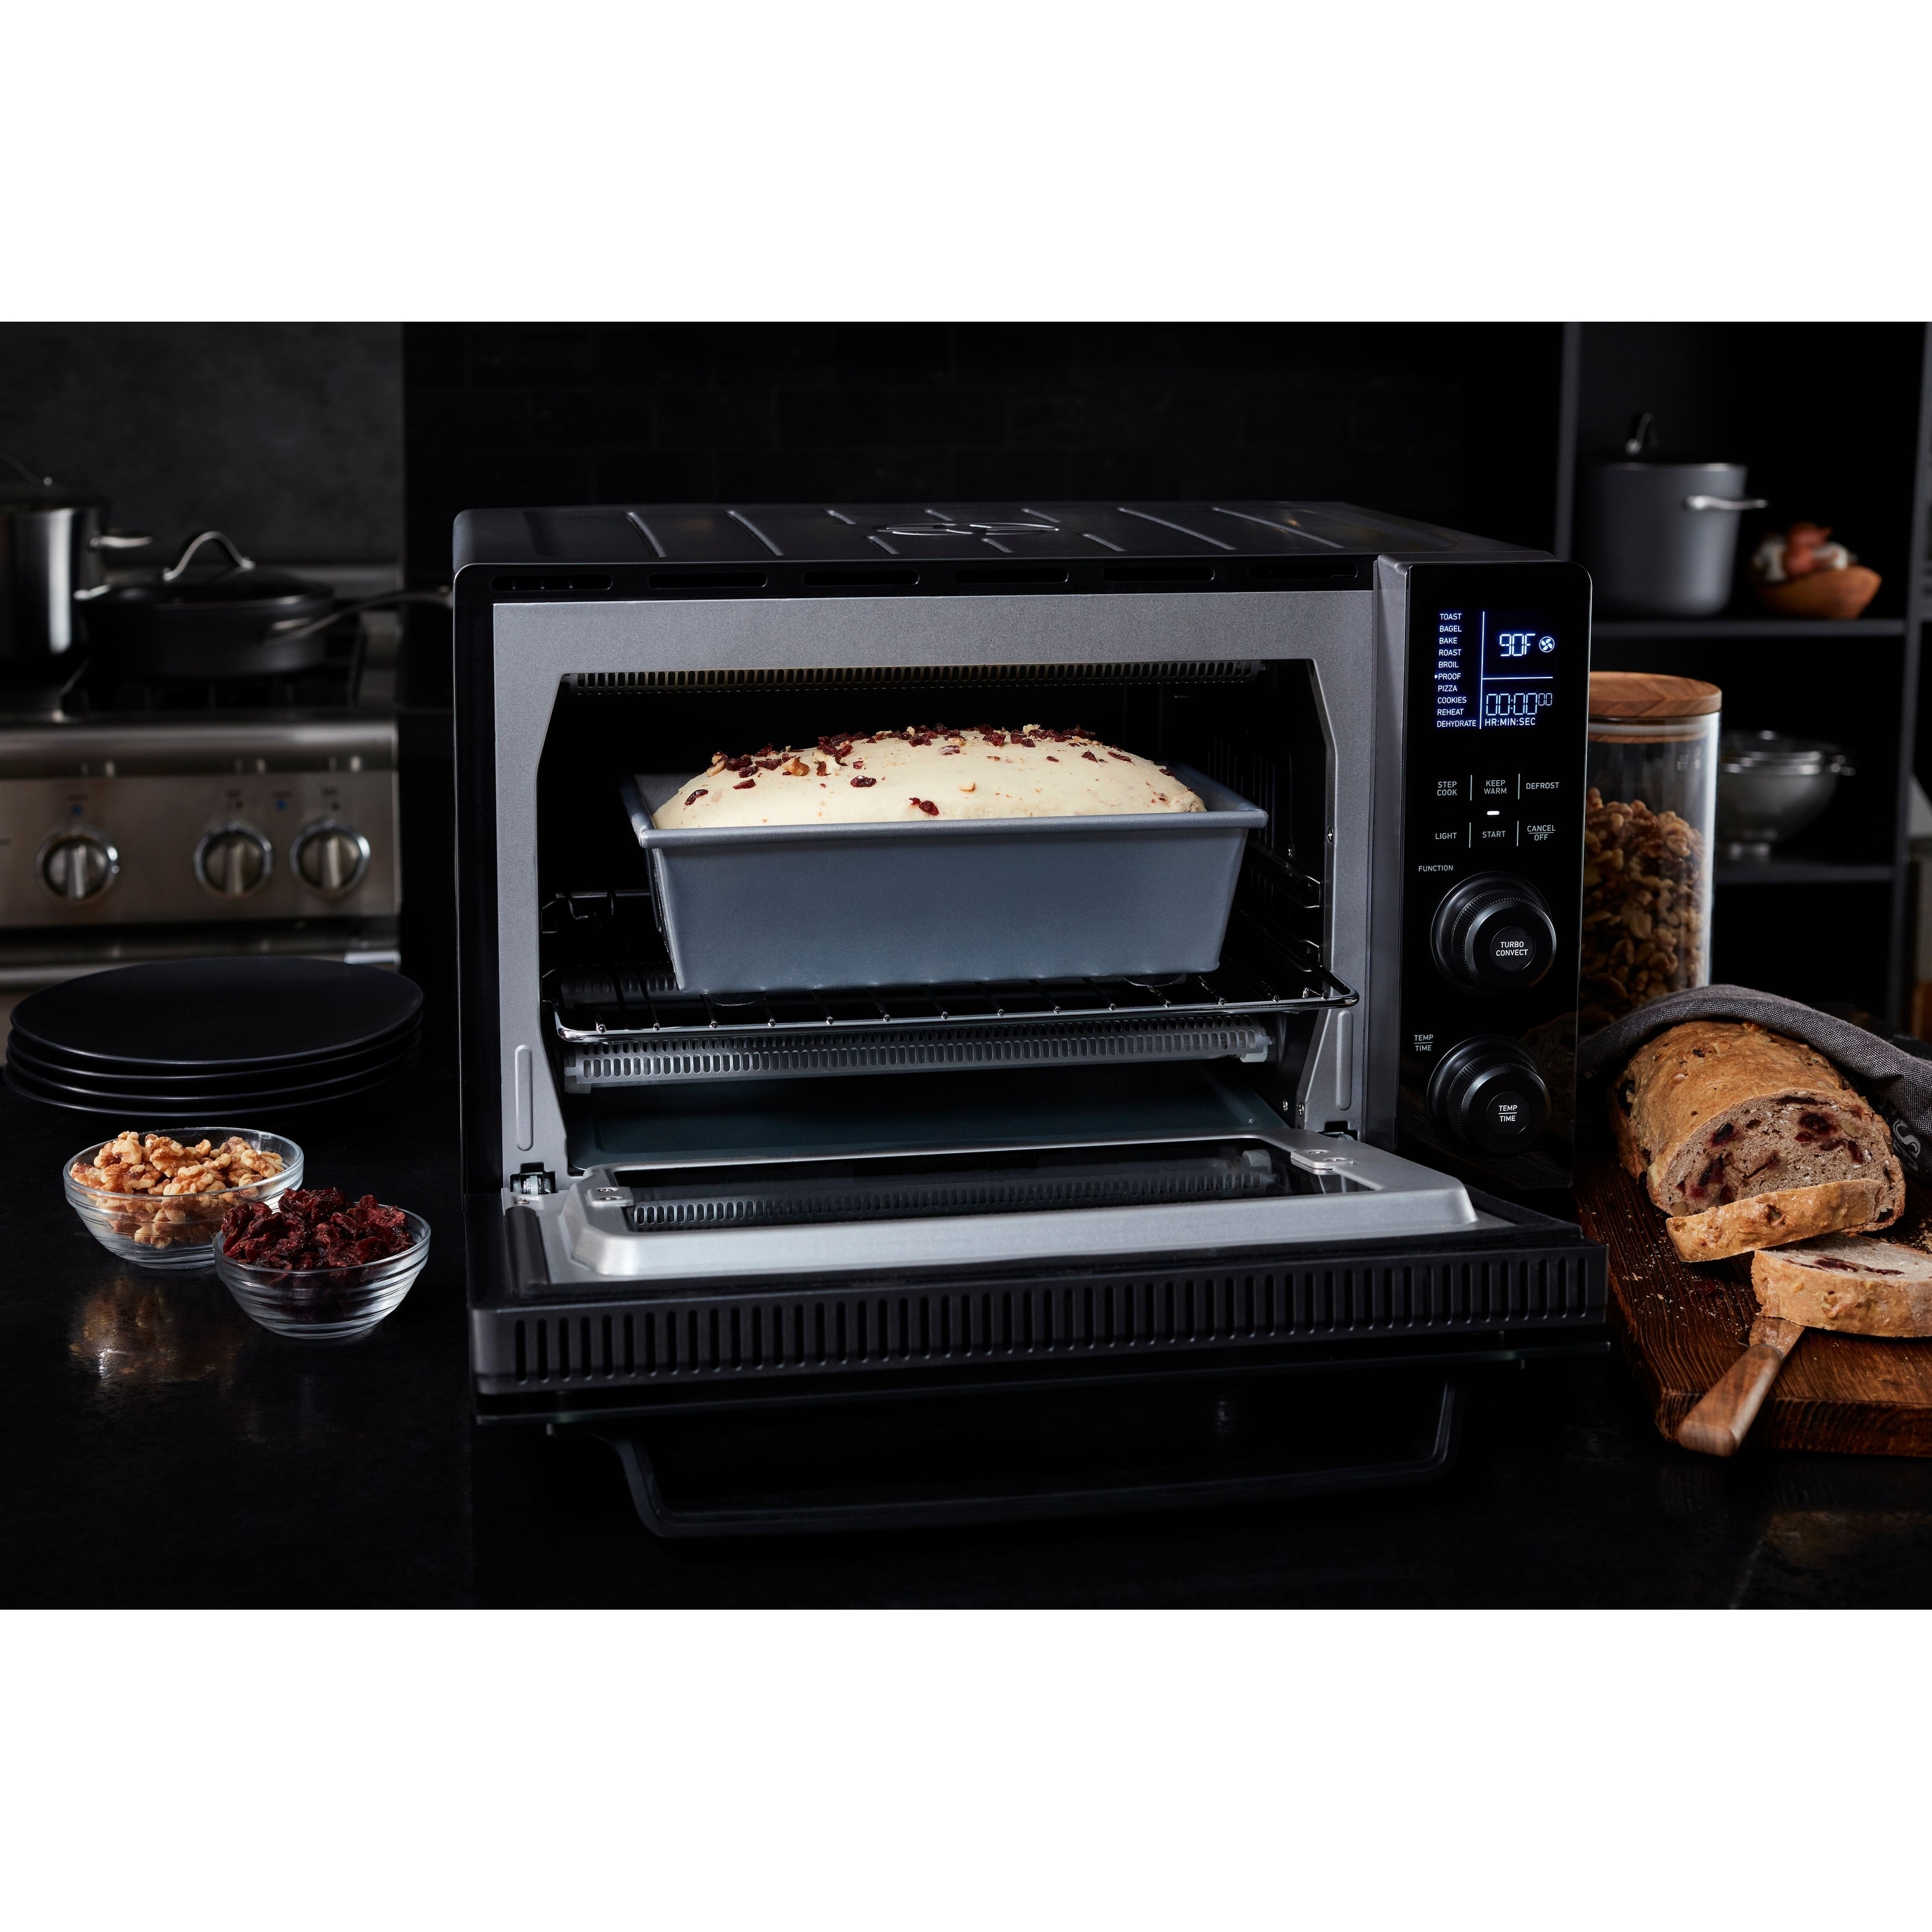 Calphalon Performance Dual Oven with Air Fryer - Bed Bath & Beyond -  38914042